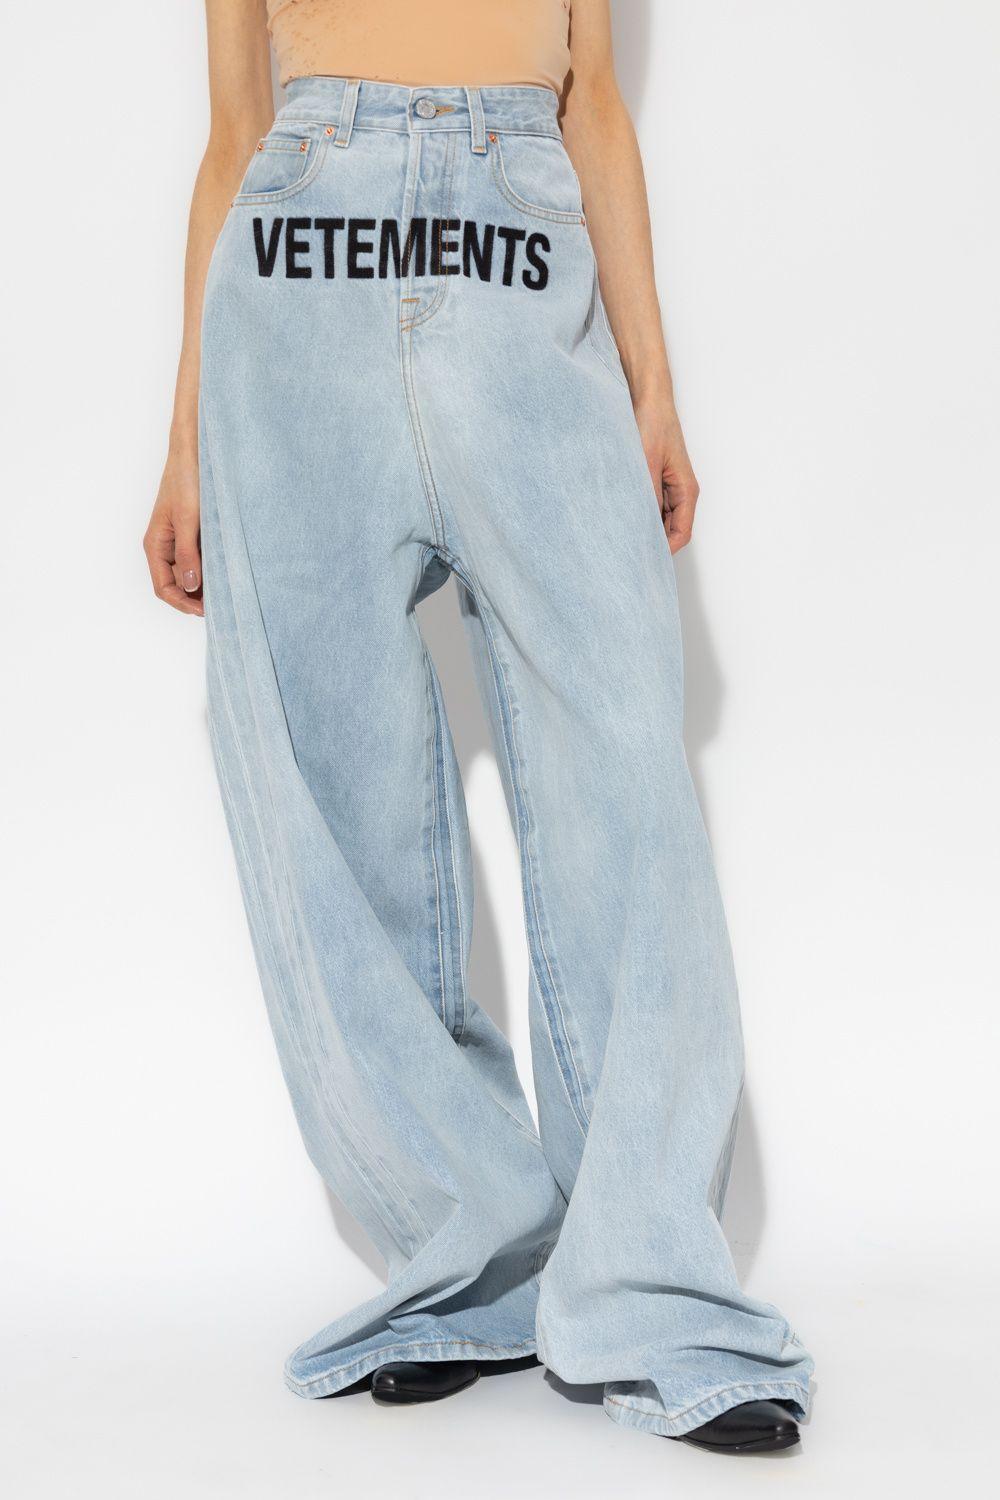 Vetements Jeans With Logo in Blue | Lyst